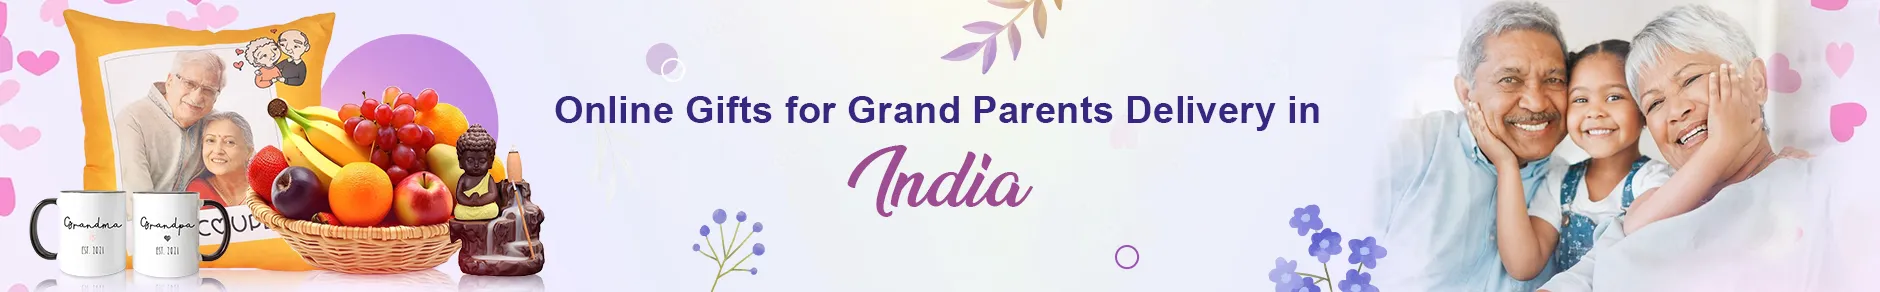 Gifts for Grand Parents to India